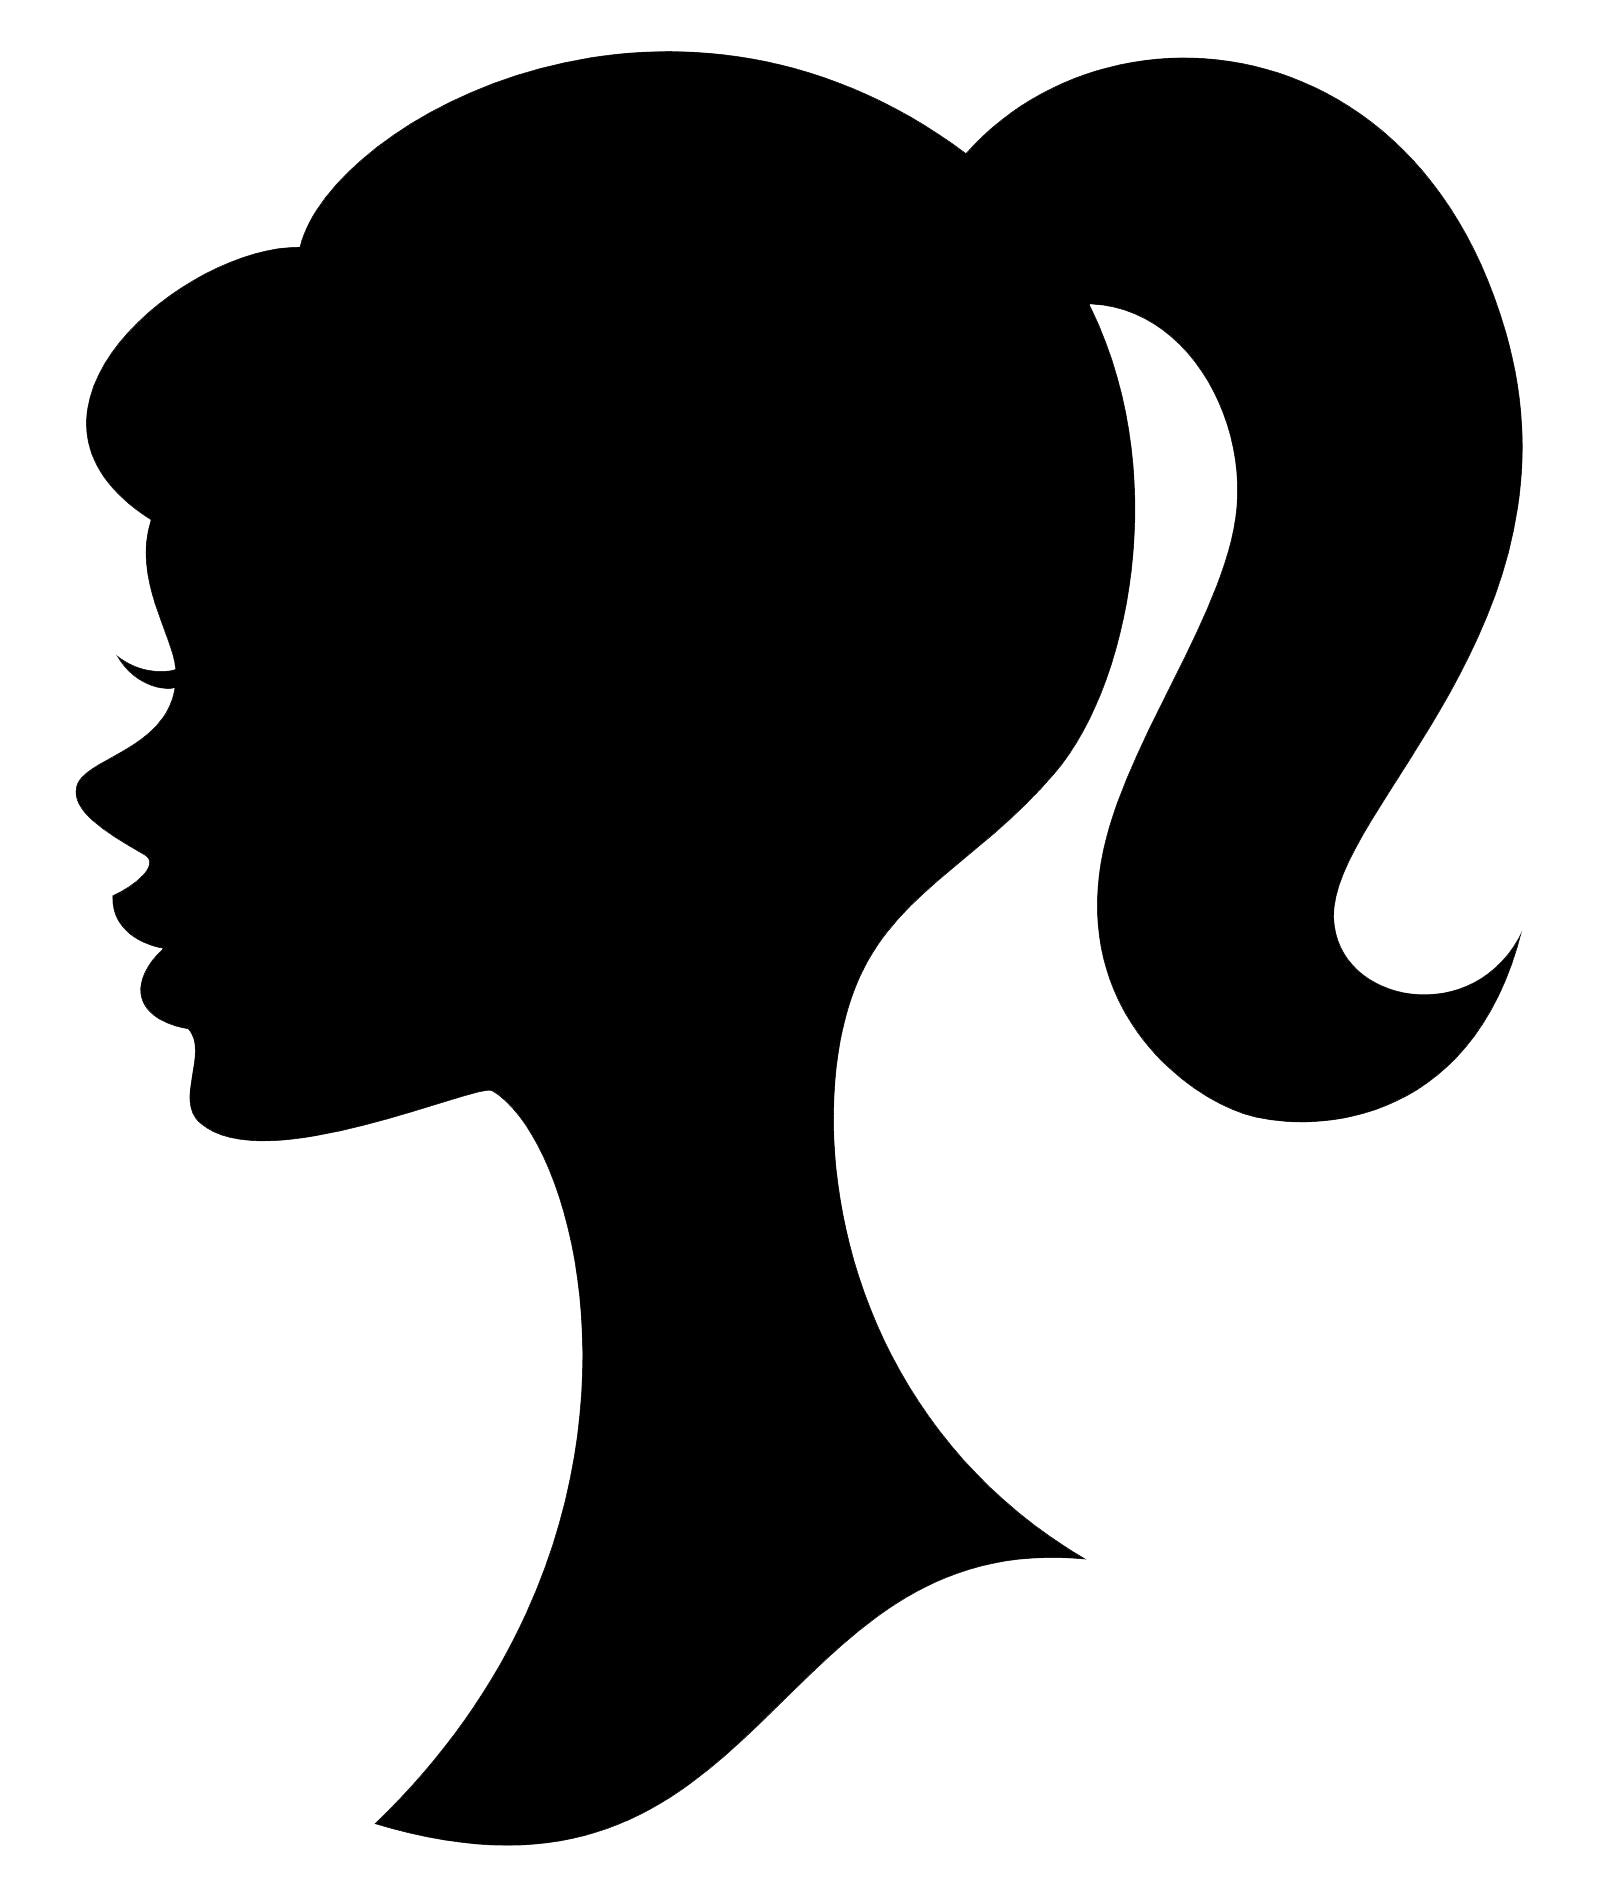  Male Head Silhouette - Clipart library